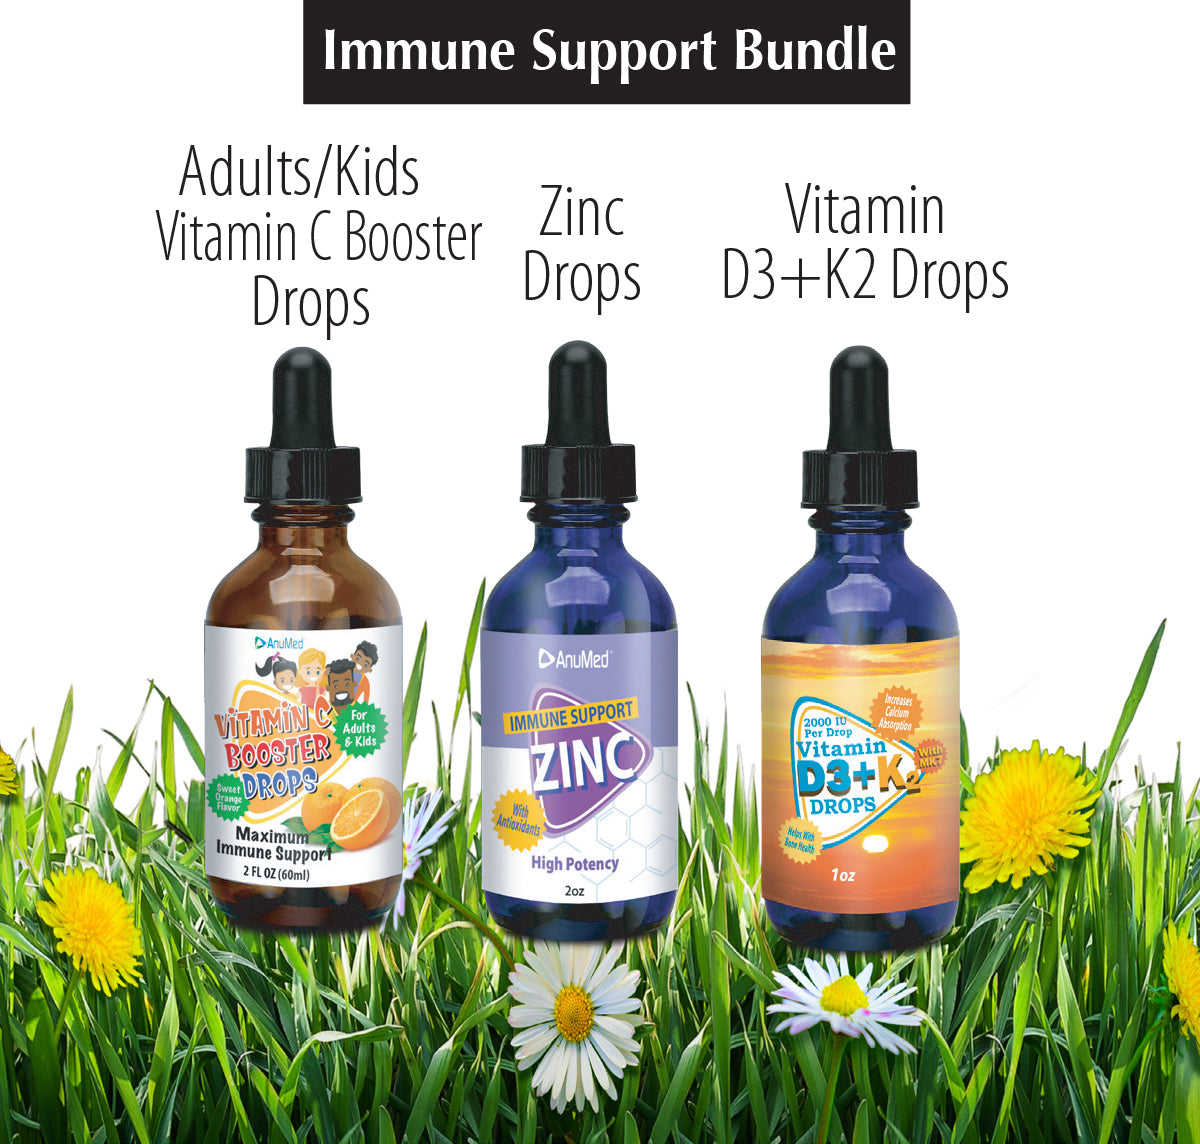 Immune Support Bundle - Vitamin C Drops, Zinc Drops & D3K2 Drops all-in-one | Help Fight Colds & Infections | Help keep the body stronger